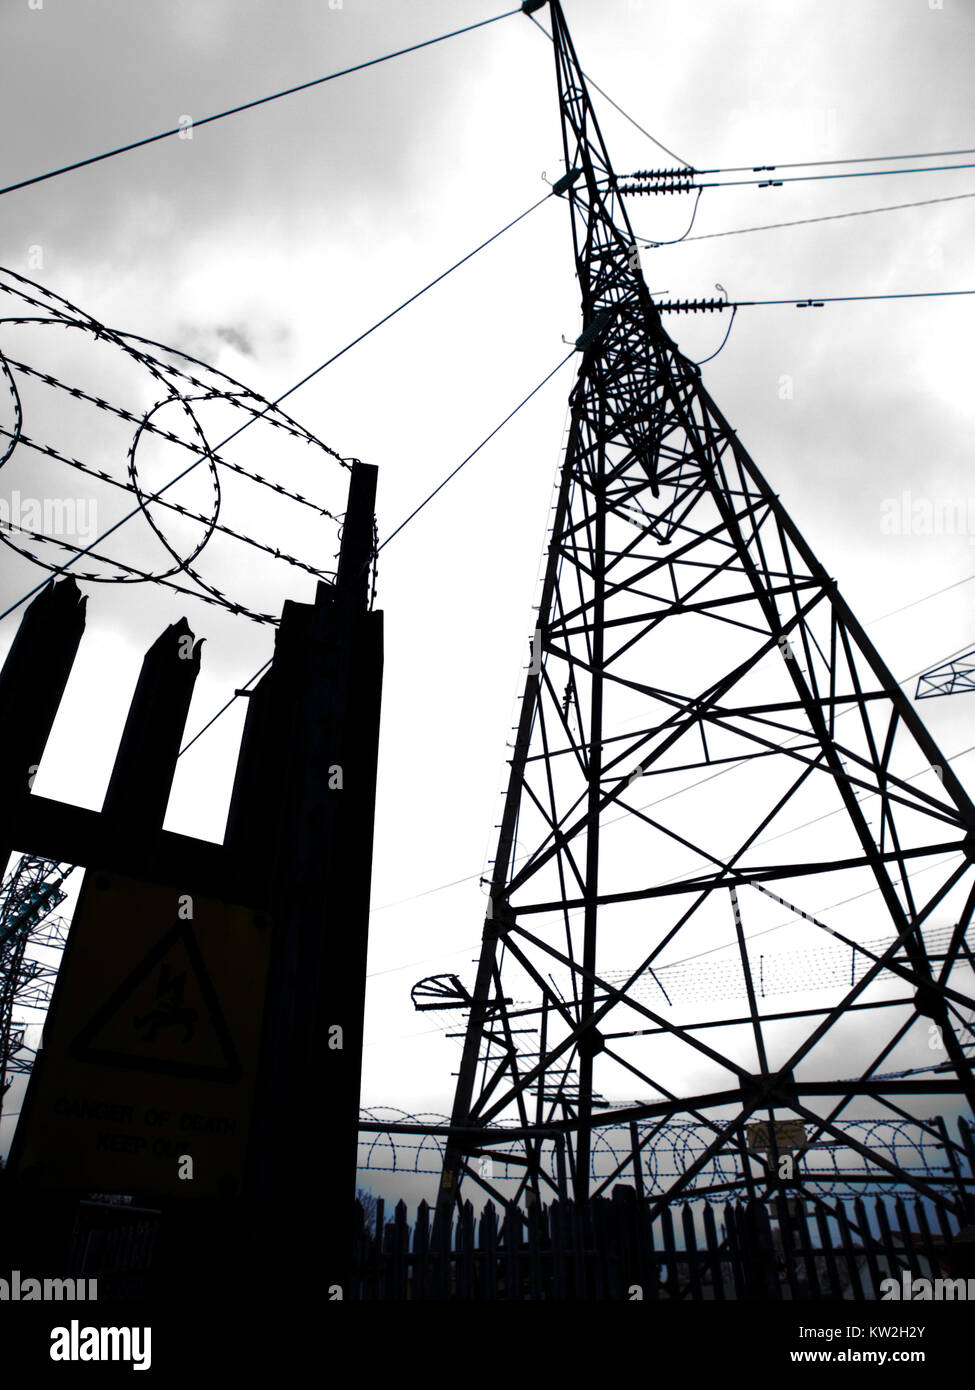 Silhouette of electricity pylon and security fence Stock Photo